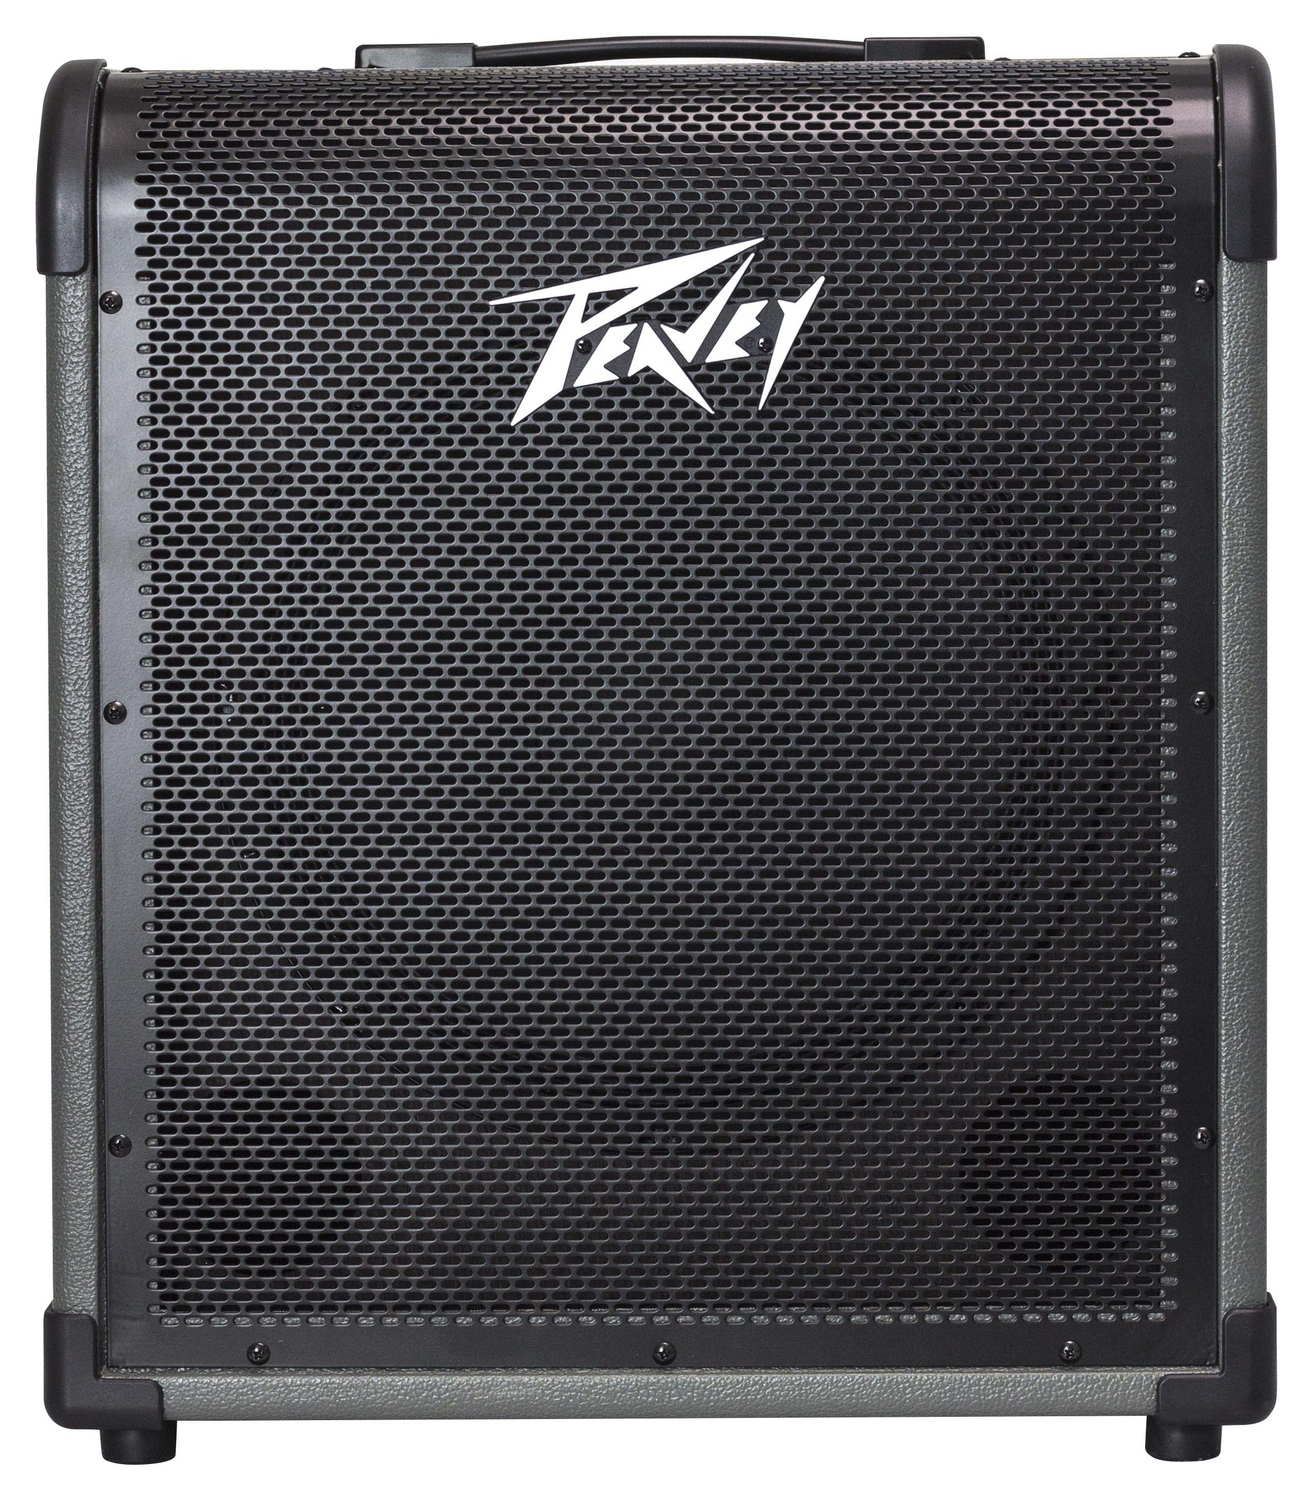 Peavey 3616830 Max 150 120US Bass Combo Amp Speaker with 3 EQ Gain Boost